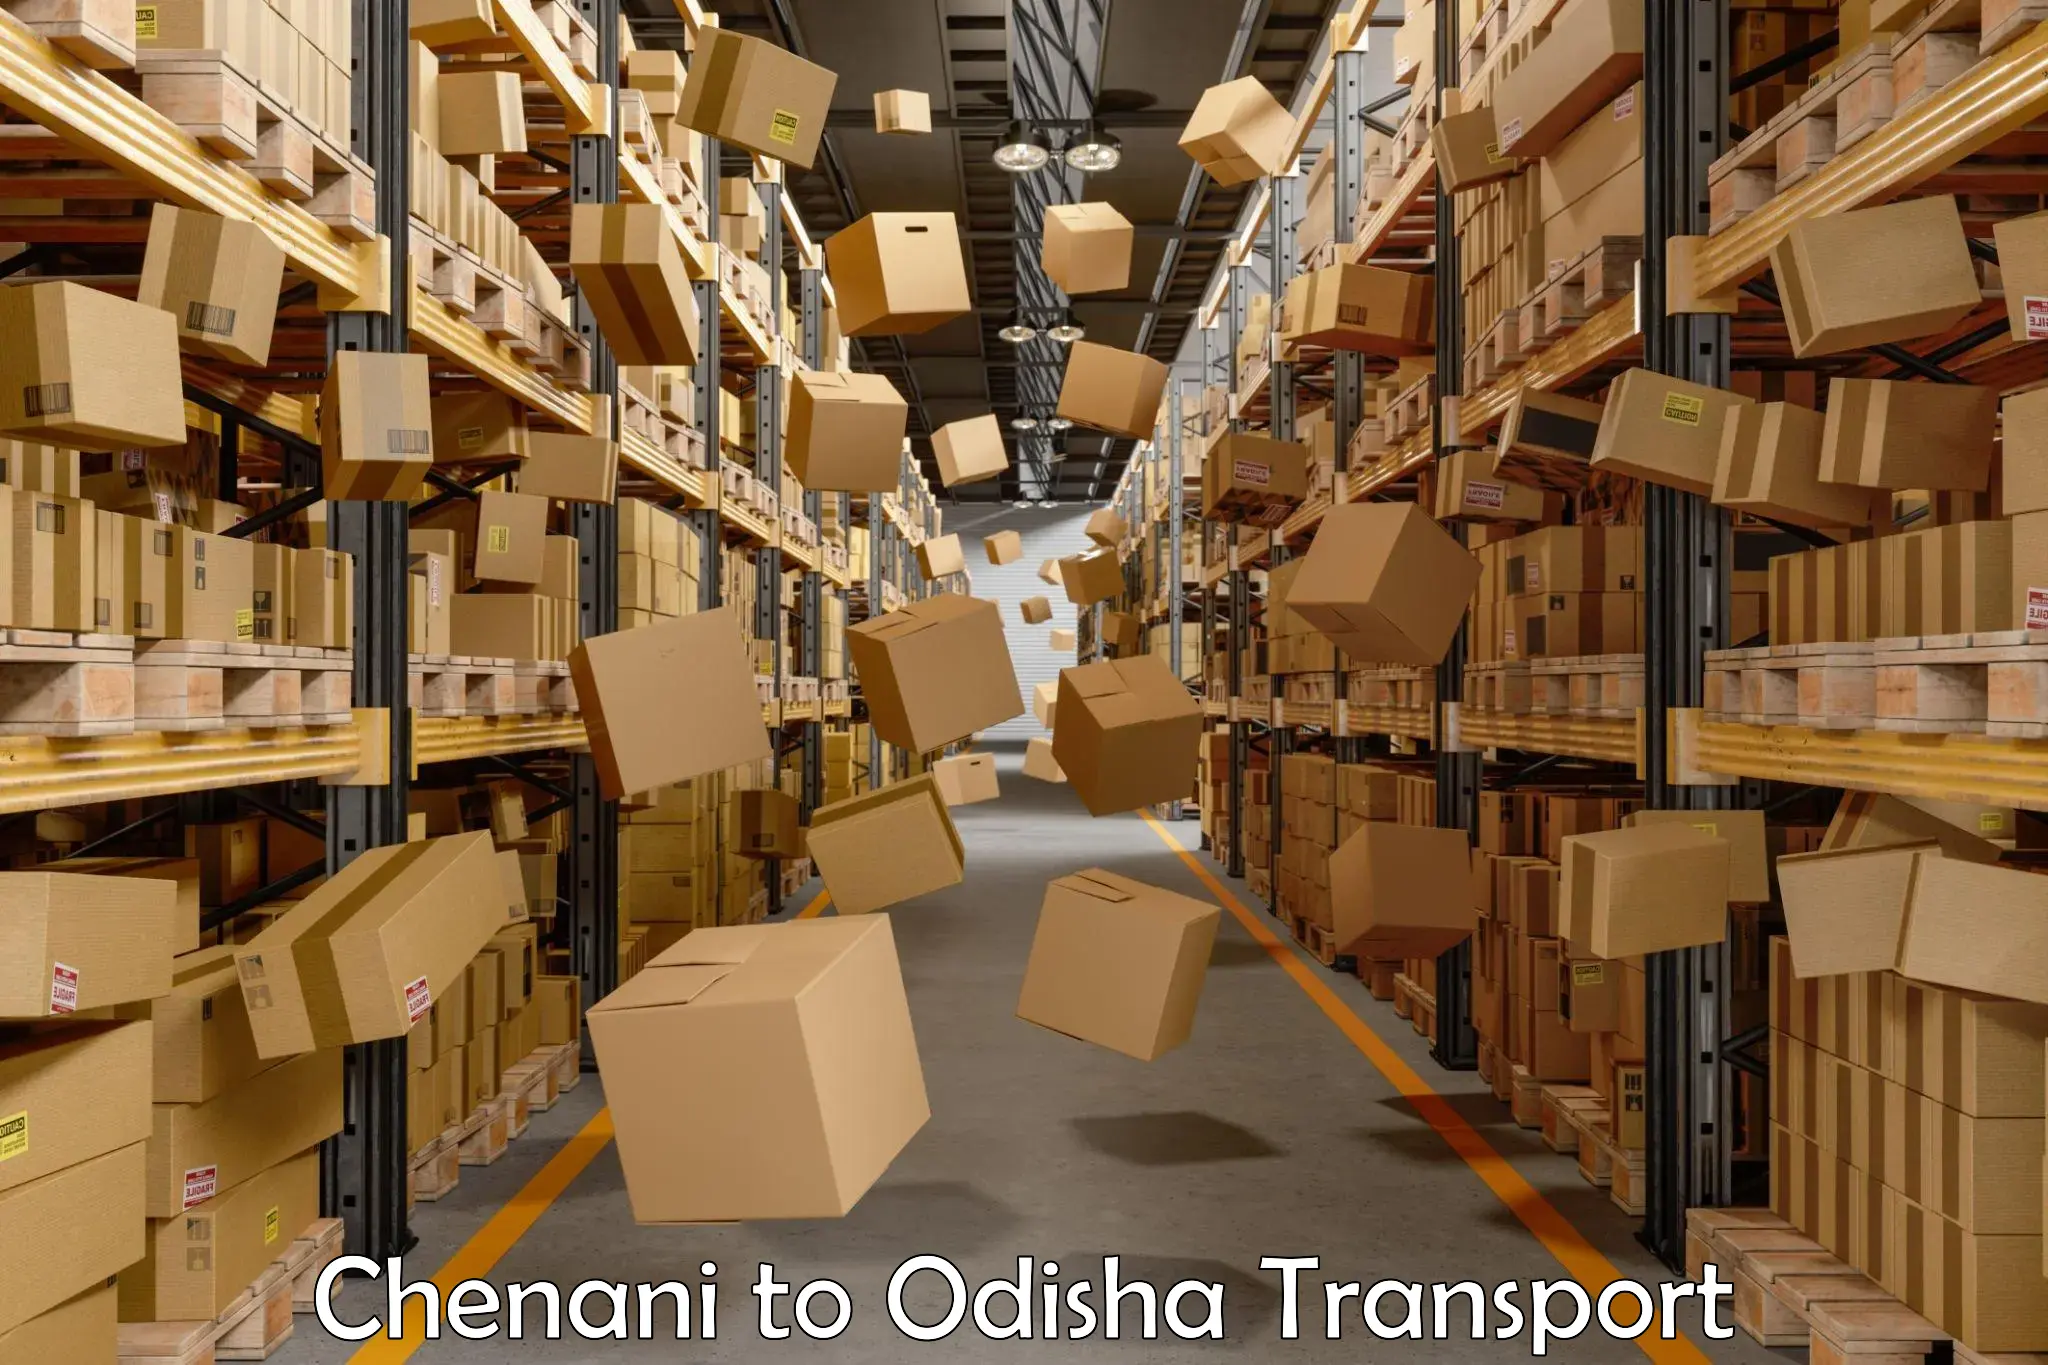 Part load transport service in India Chenani to Ganjam